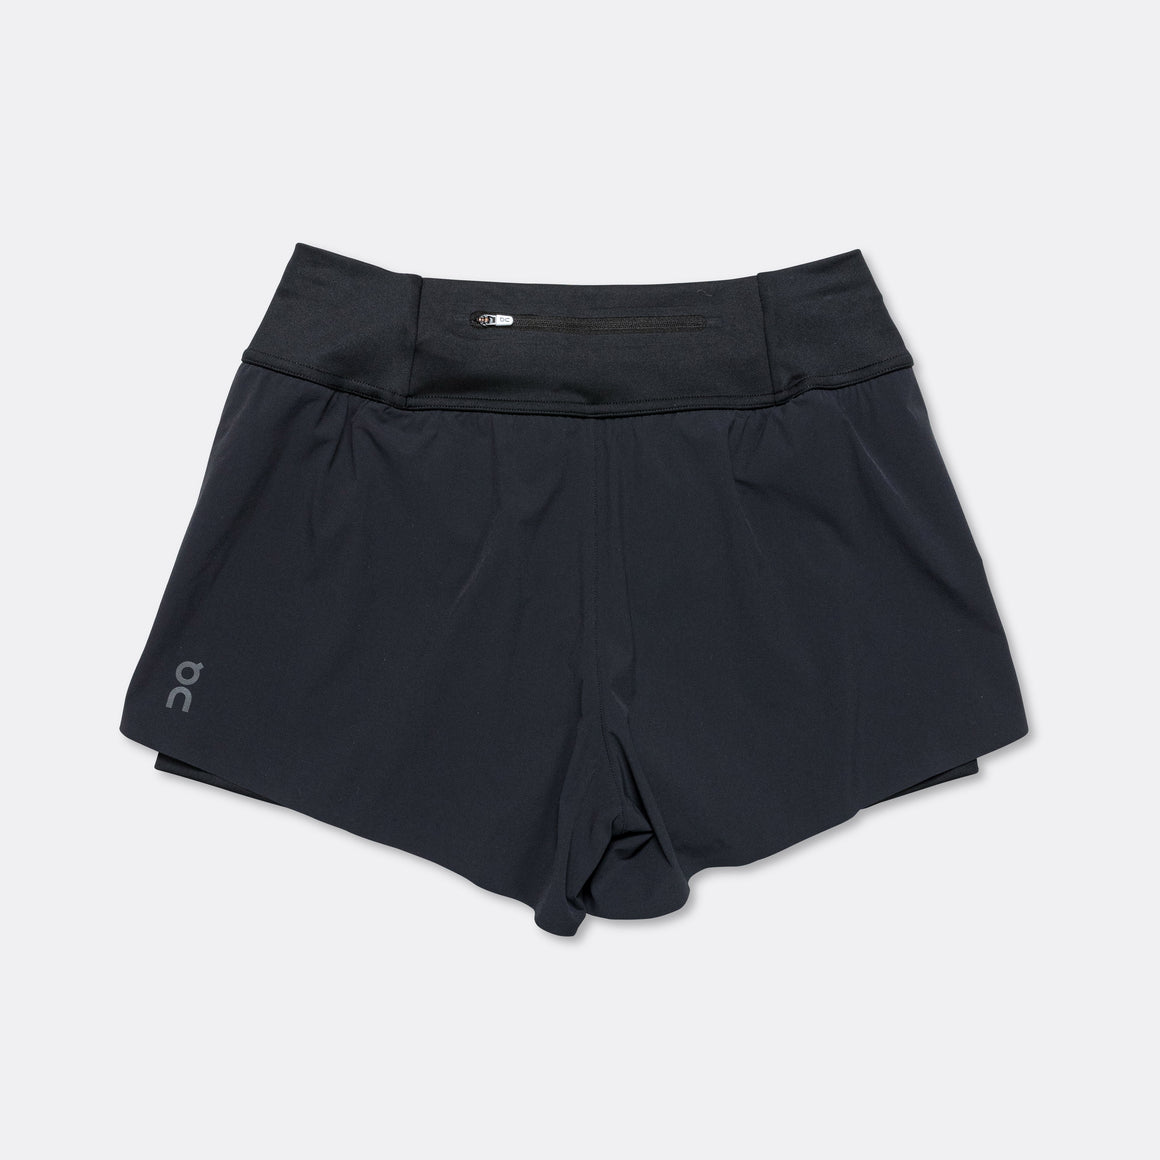 On Running - Womens Running Shorts - Black - Up There Athletics